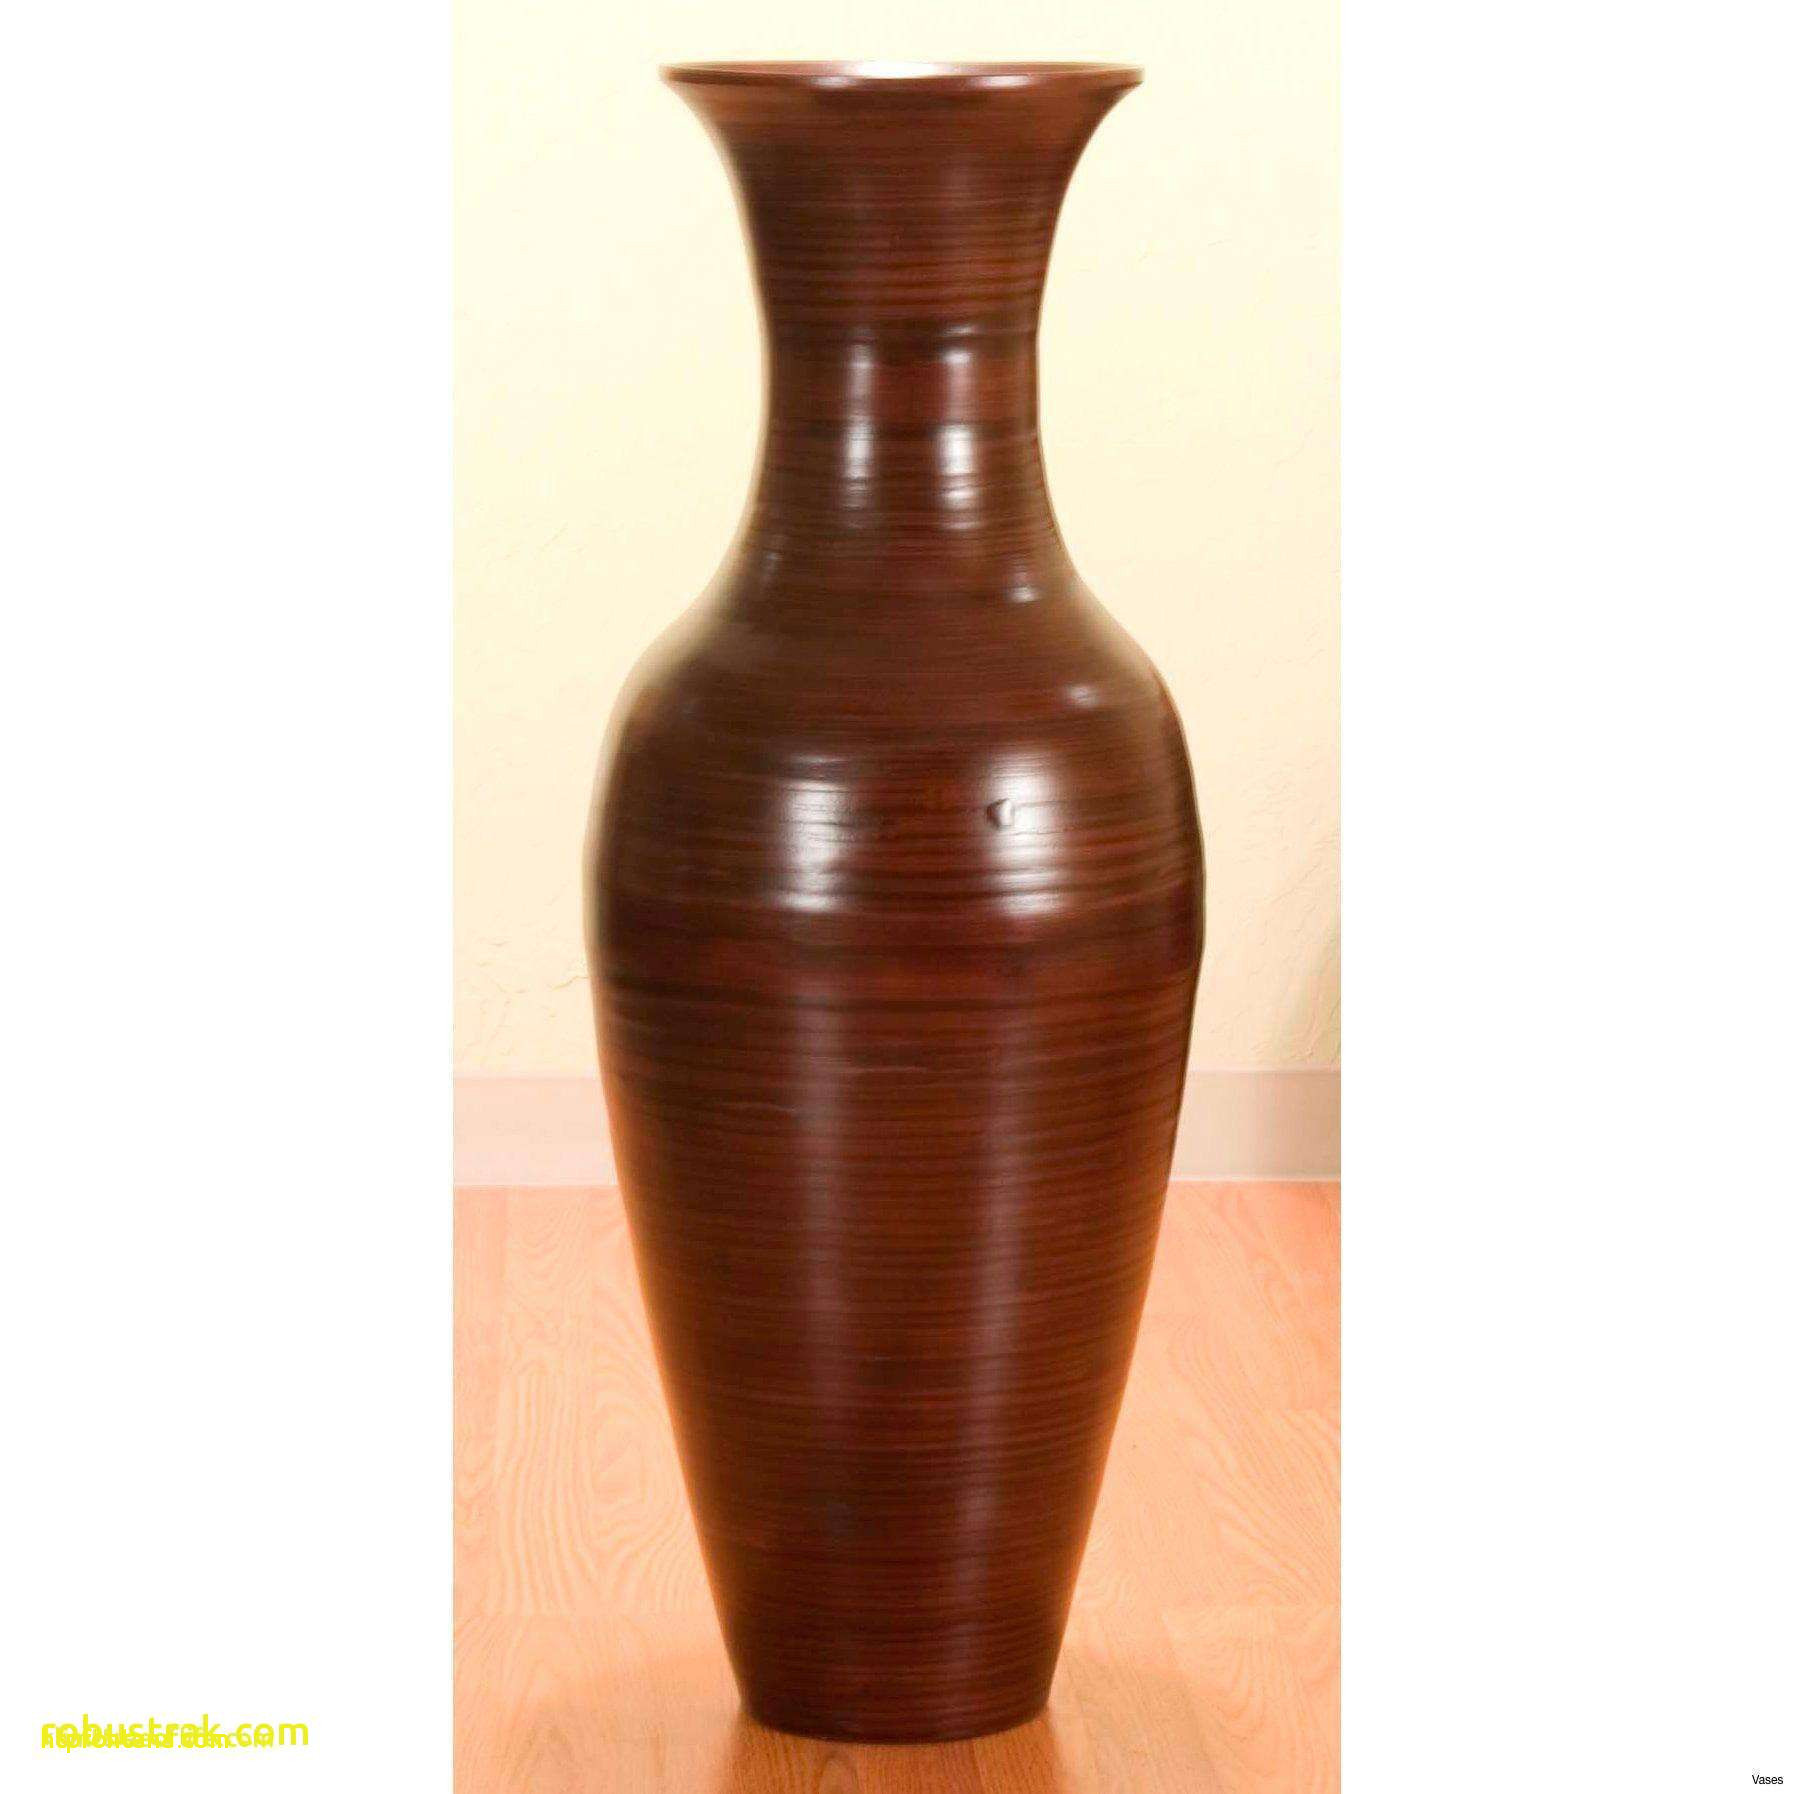 21 Stunning Large Blue Floor Vase 2023 free download large blue floor vase of orange floor vase gallery articles with flower vases for sale tag with regard to orange floor vase collection beautiful living room ideas orange and brown of orange 